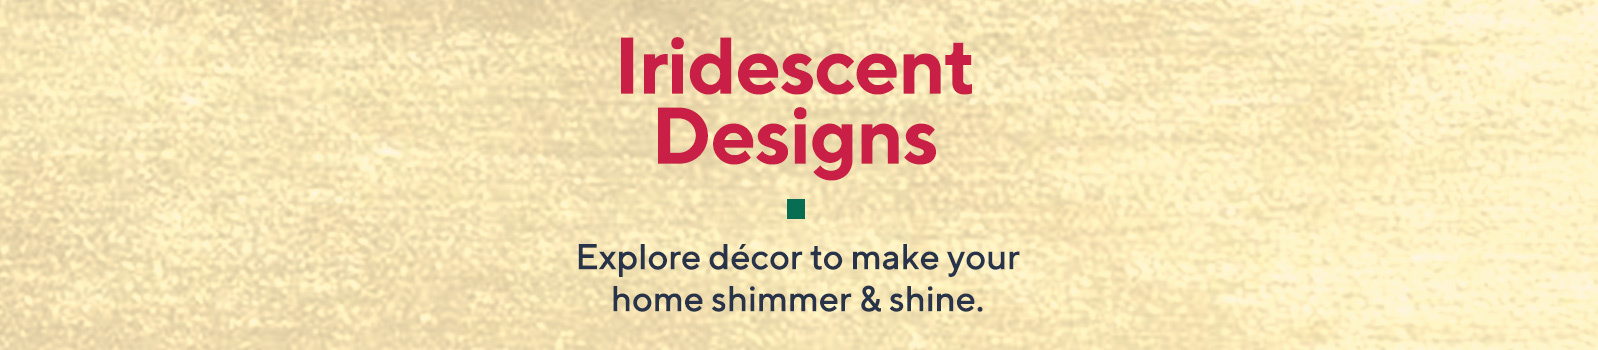 Iridescent Designs  Explore décor to make your summertime shimmer & shine!